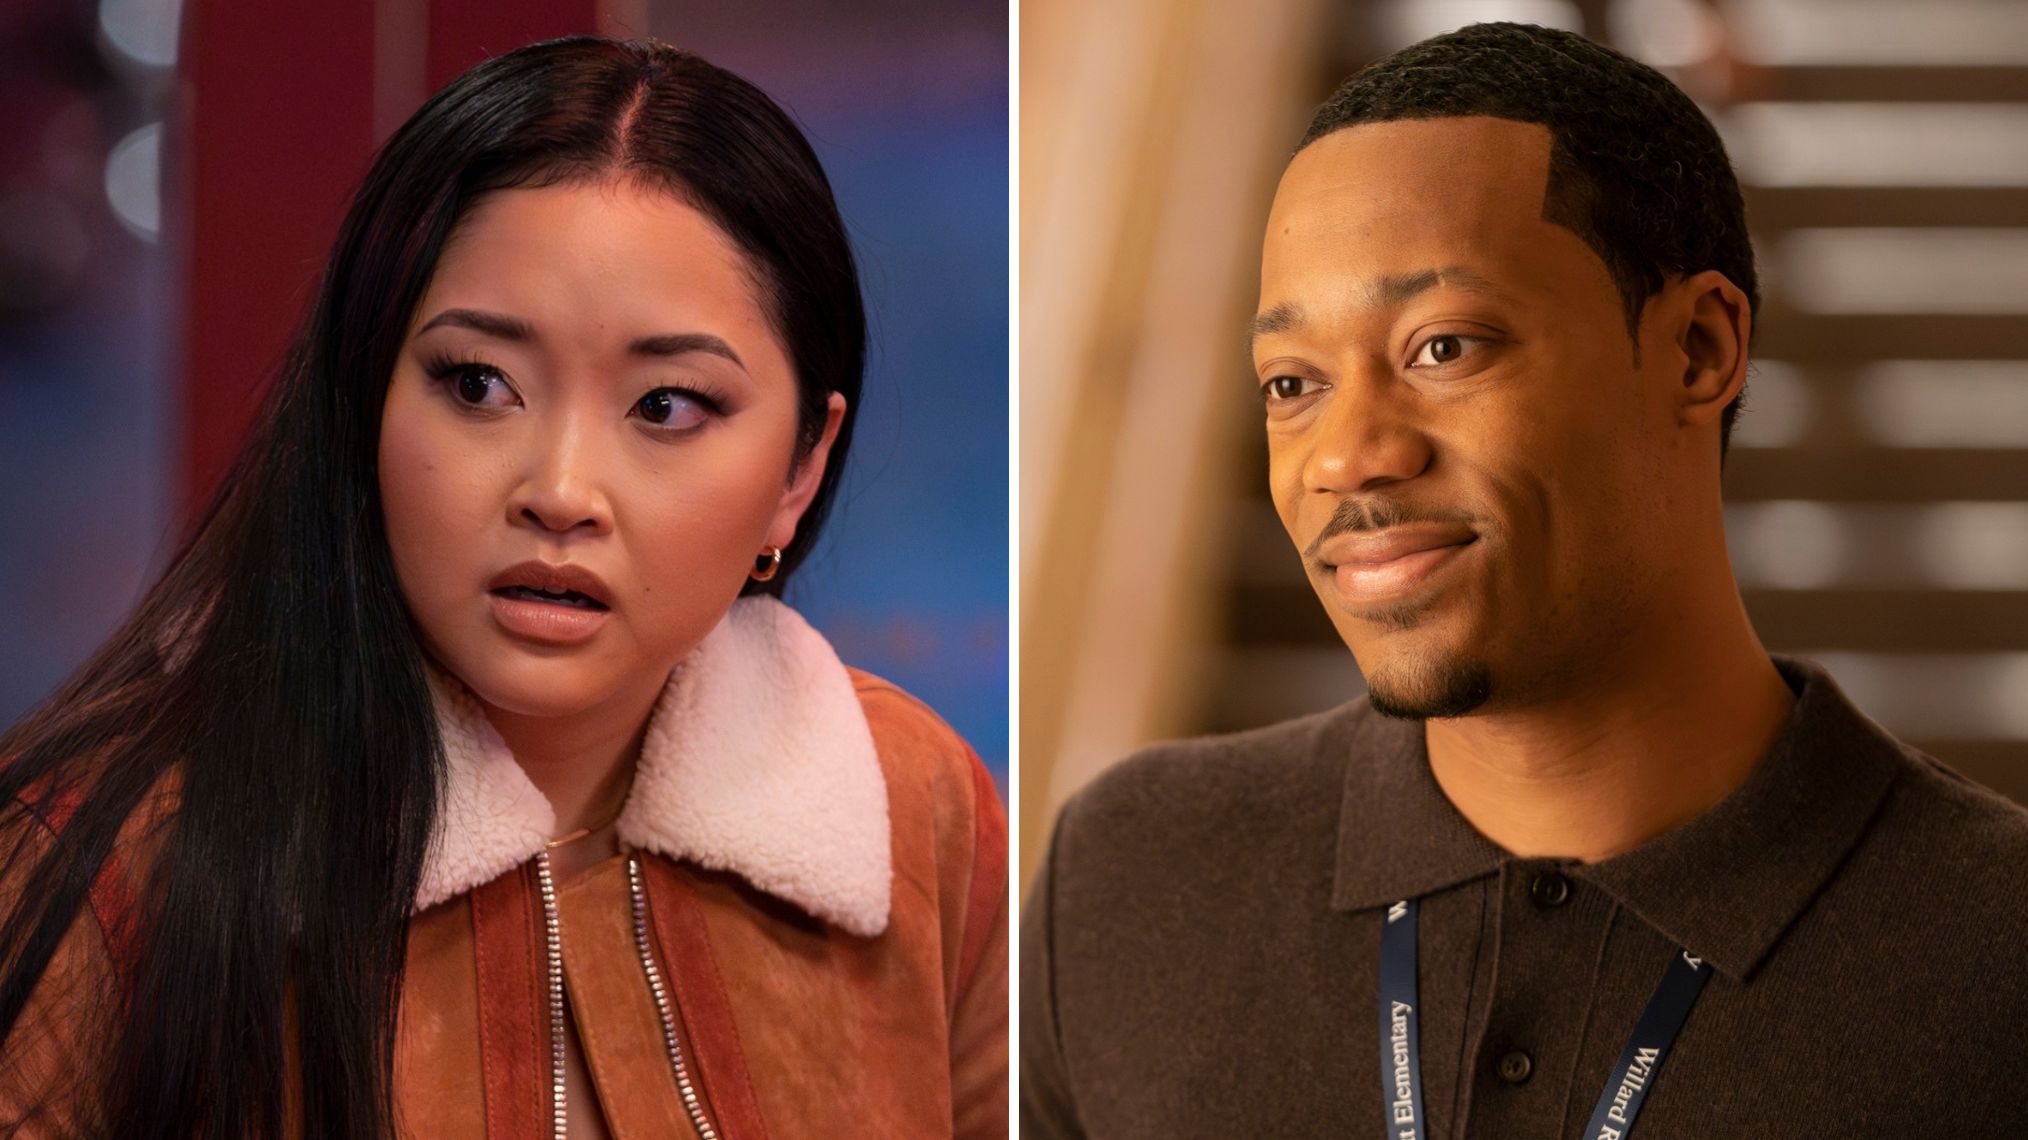 Gregory Takes Lana Condor on a Double Date in New Photos